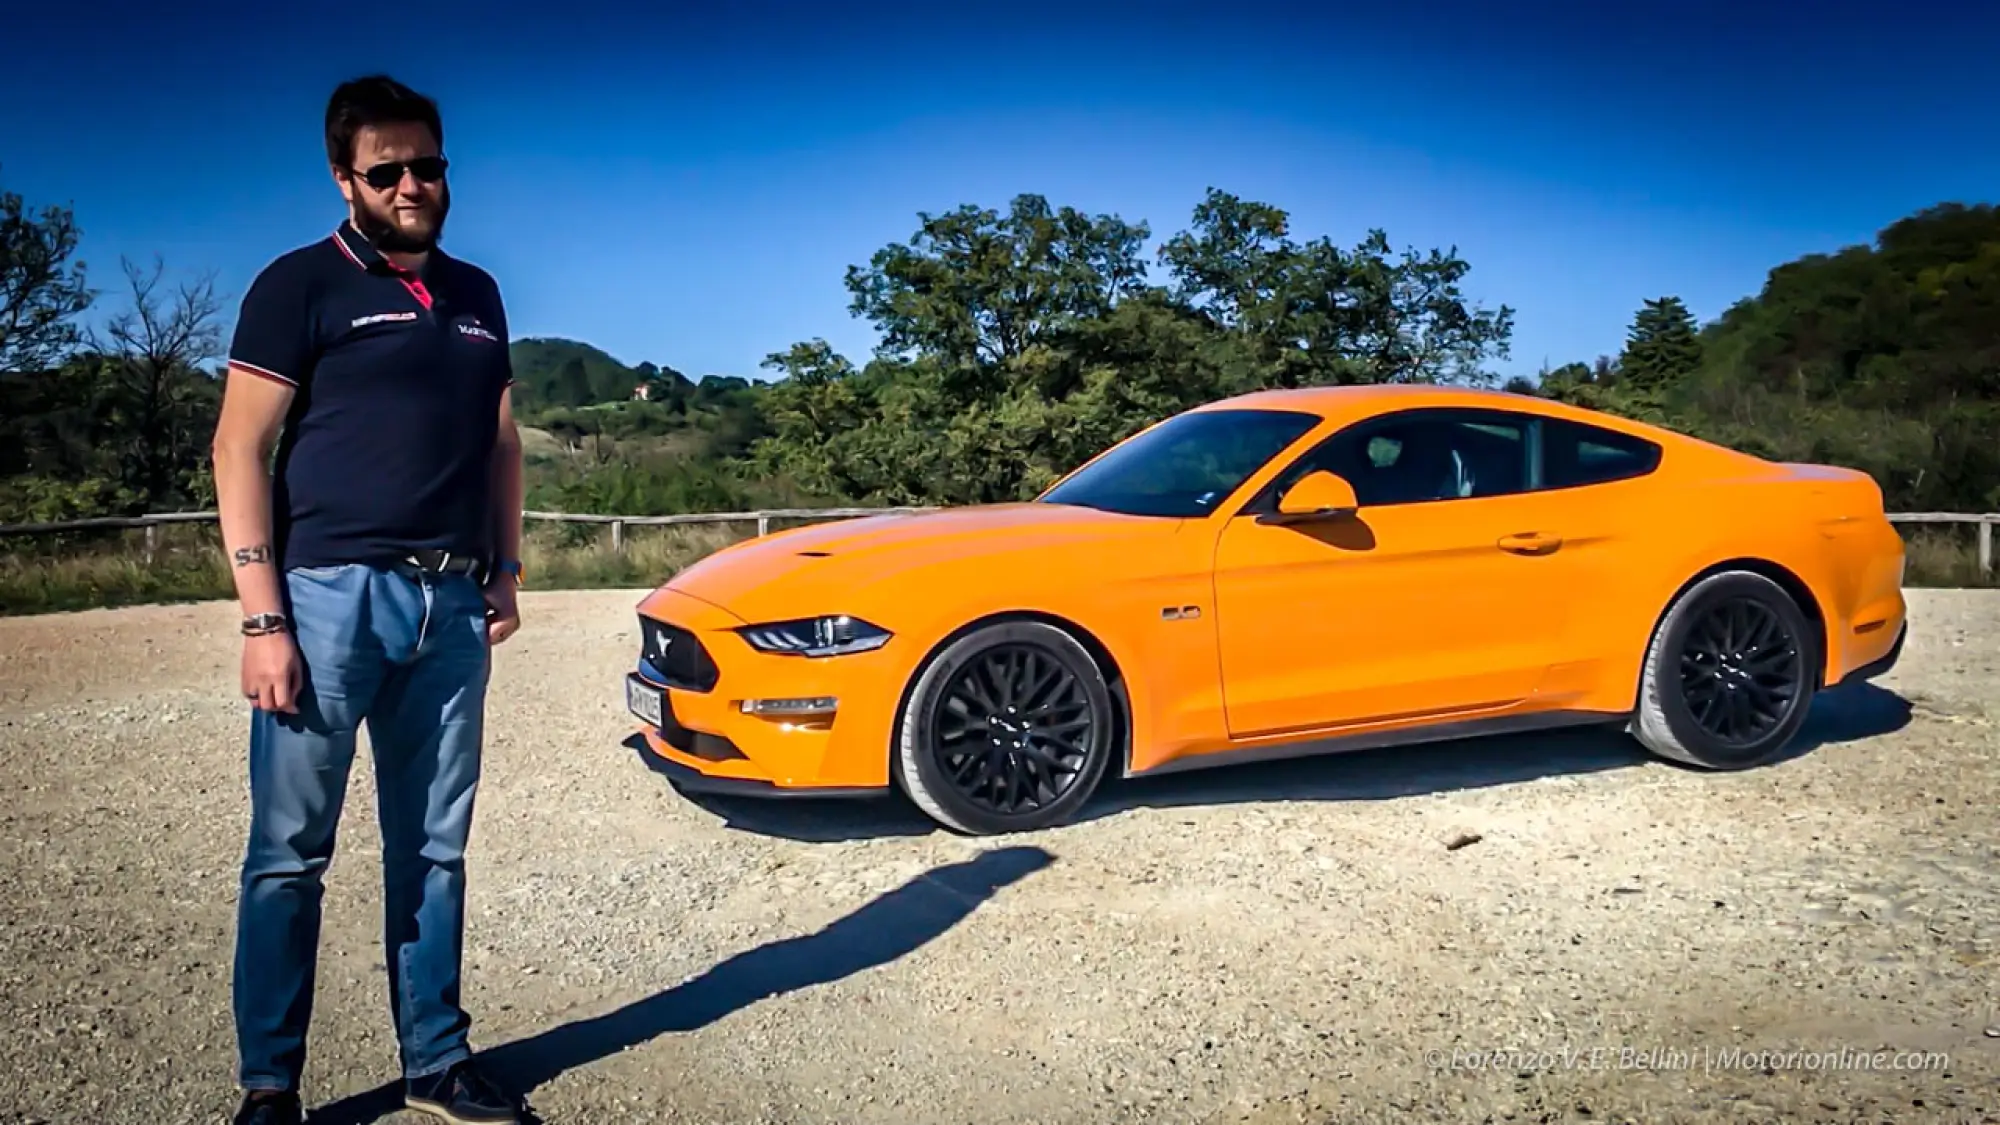 Nuova Ford Mustang MY 2018 - Test Drive in Anteprima - 30